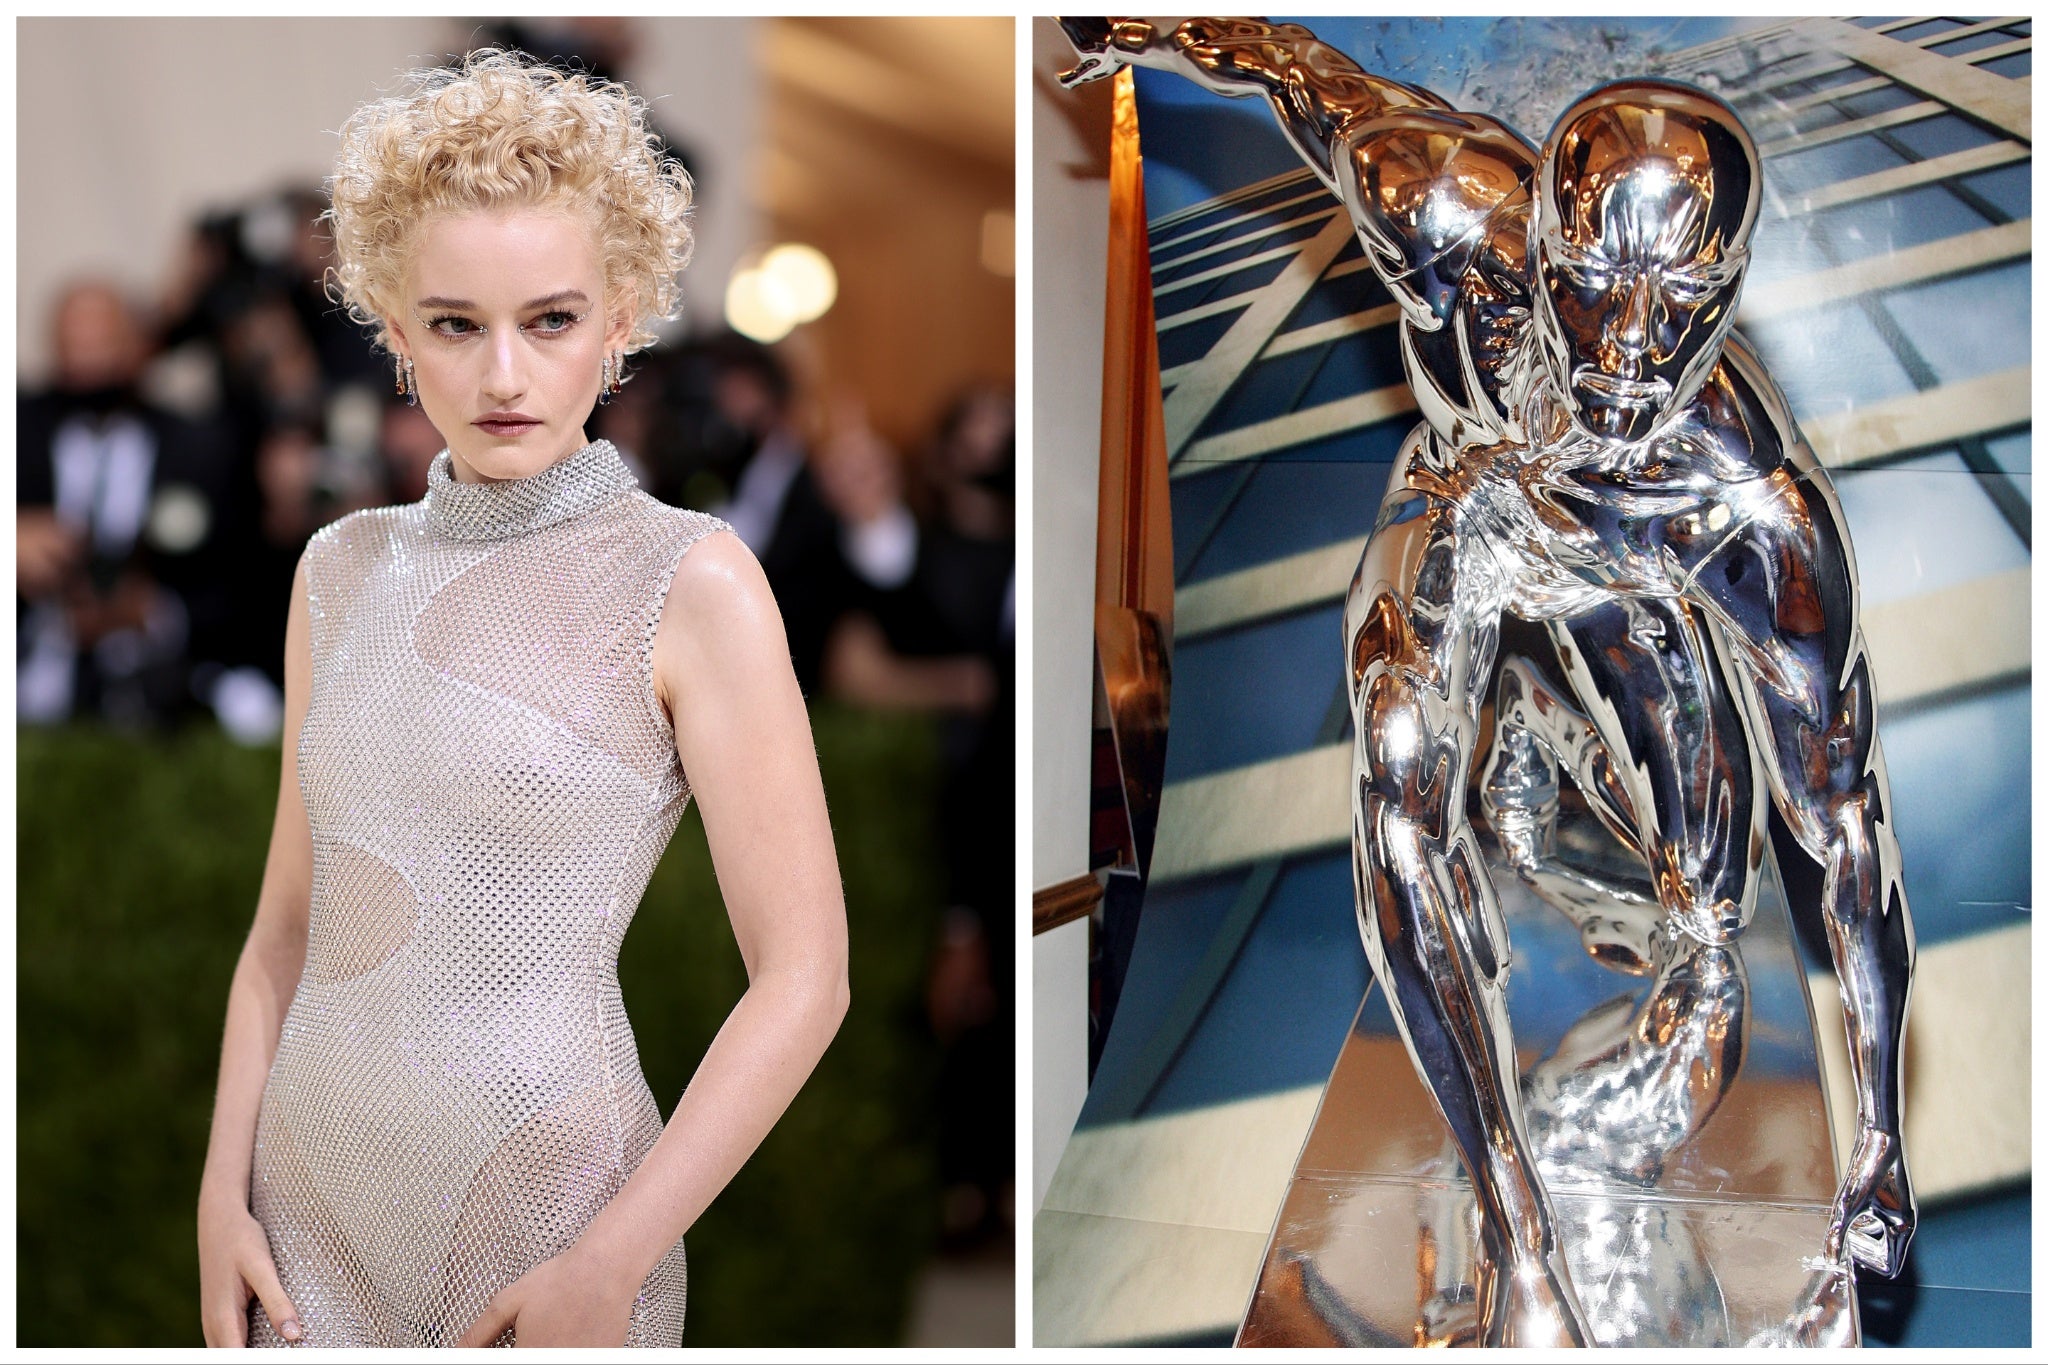 Julia Garner (left) and a model of the Silver Surfer from 2007’s ‘Fantastic Four: Rise of the Silver Surfer’